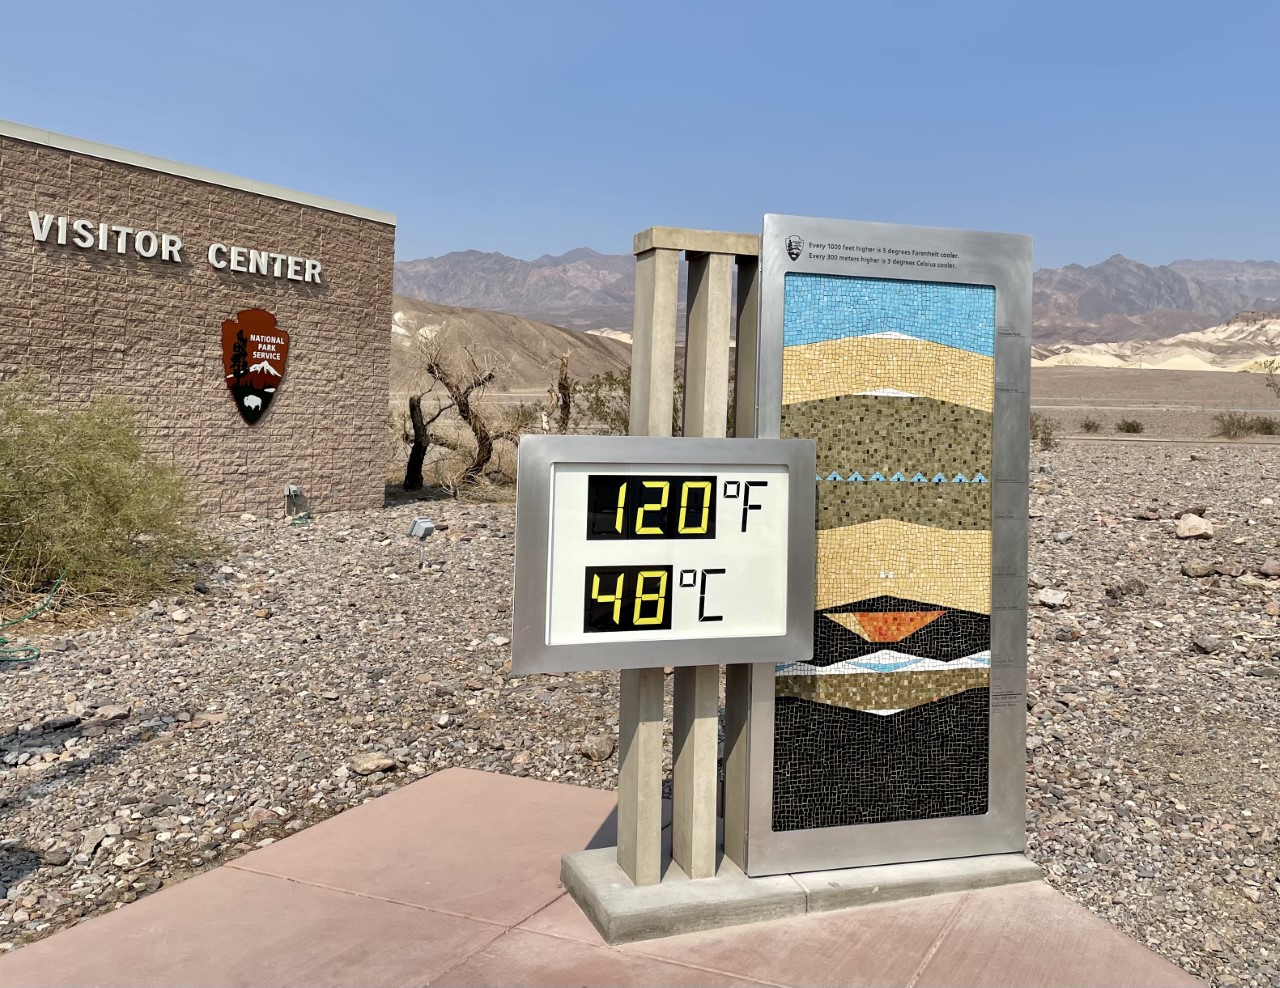 Outdoor digital thermometer display of 120F, 48C. A colorful ceramic mosaic approximately 6 ft tall depicting a valley, crater, charcoal kilns and mountains is to the right of the thermometer. Background: bulding with "Visitor Center" and NPS Arrowhead